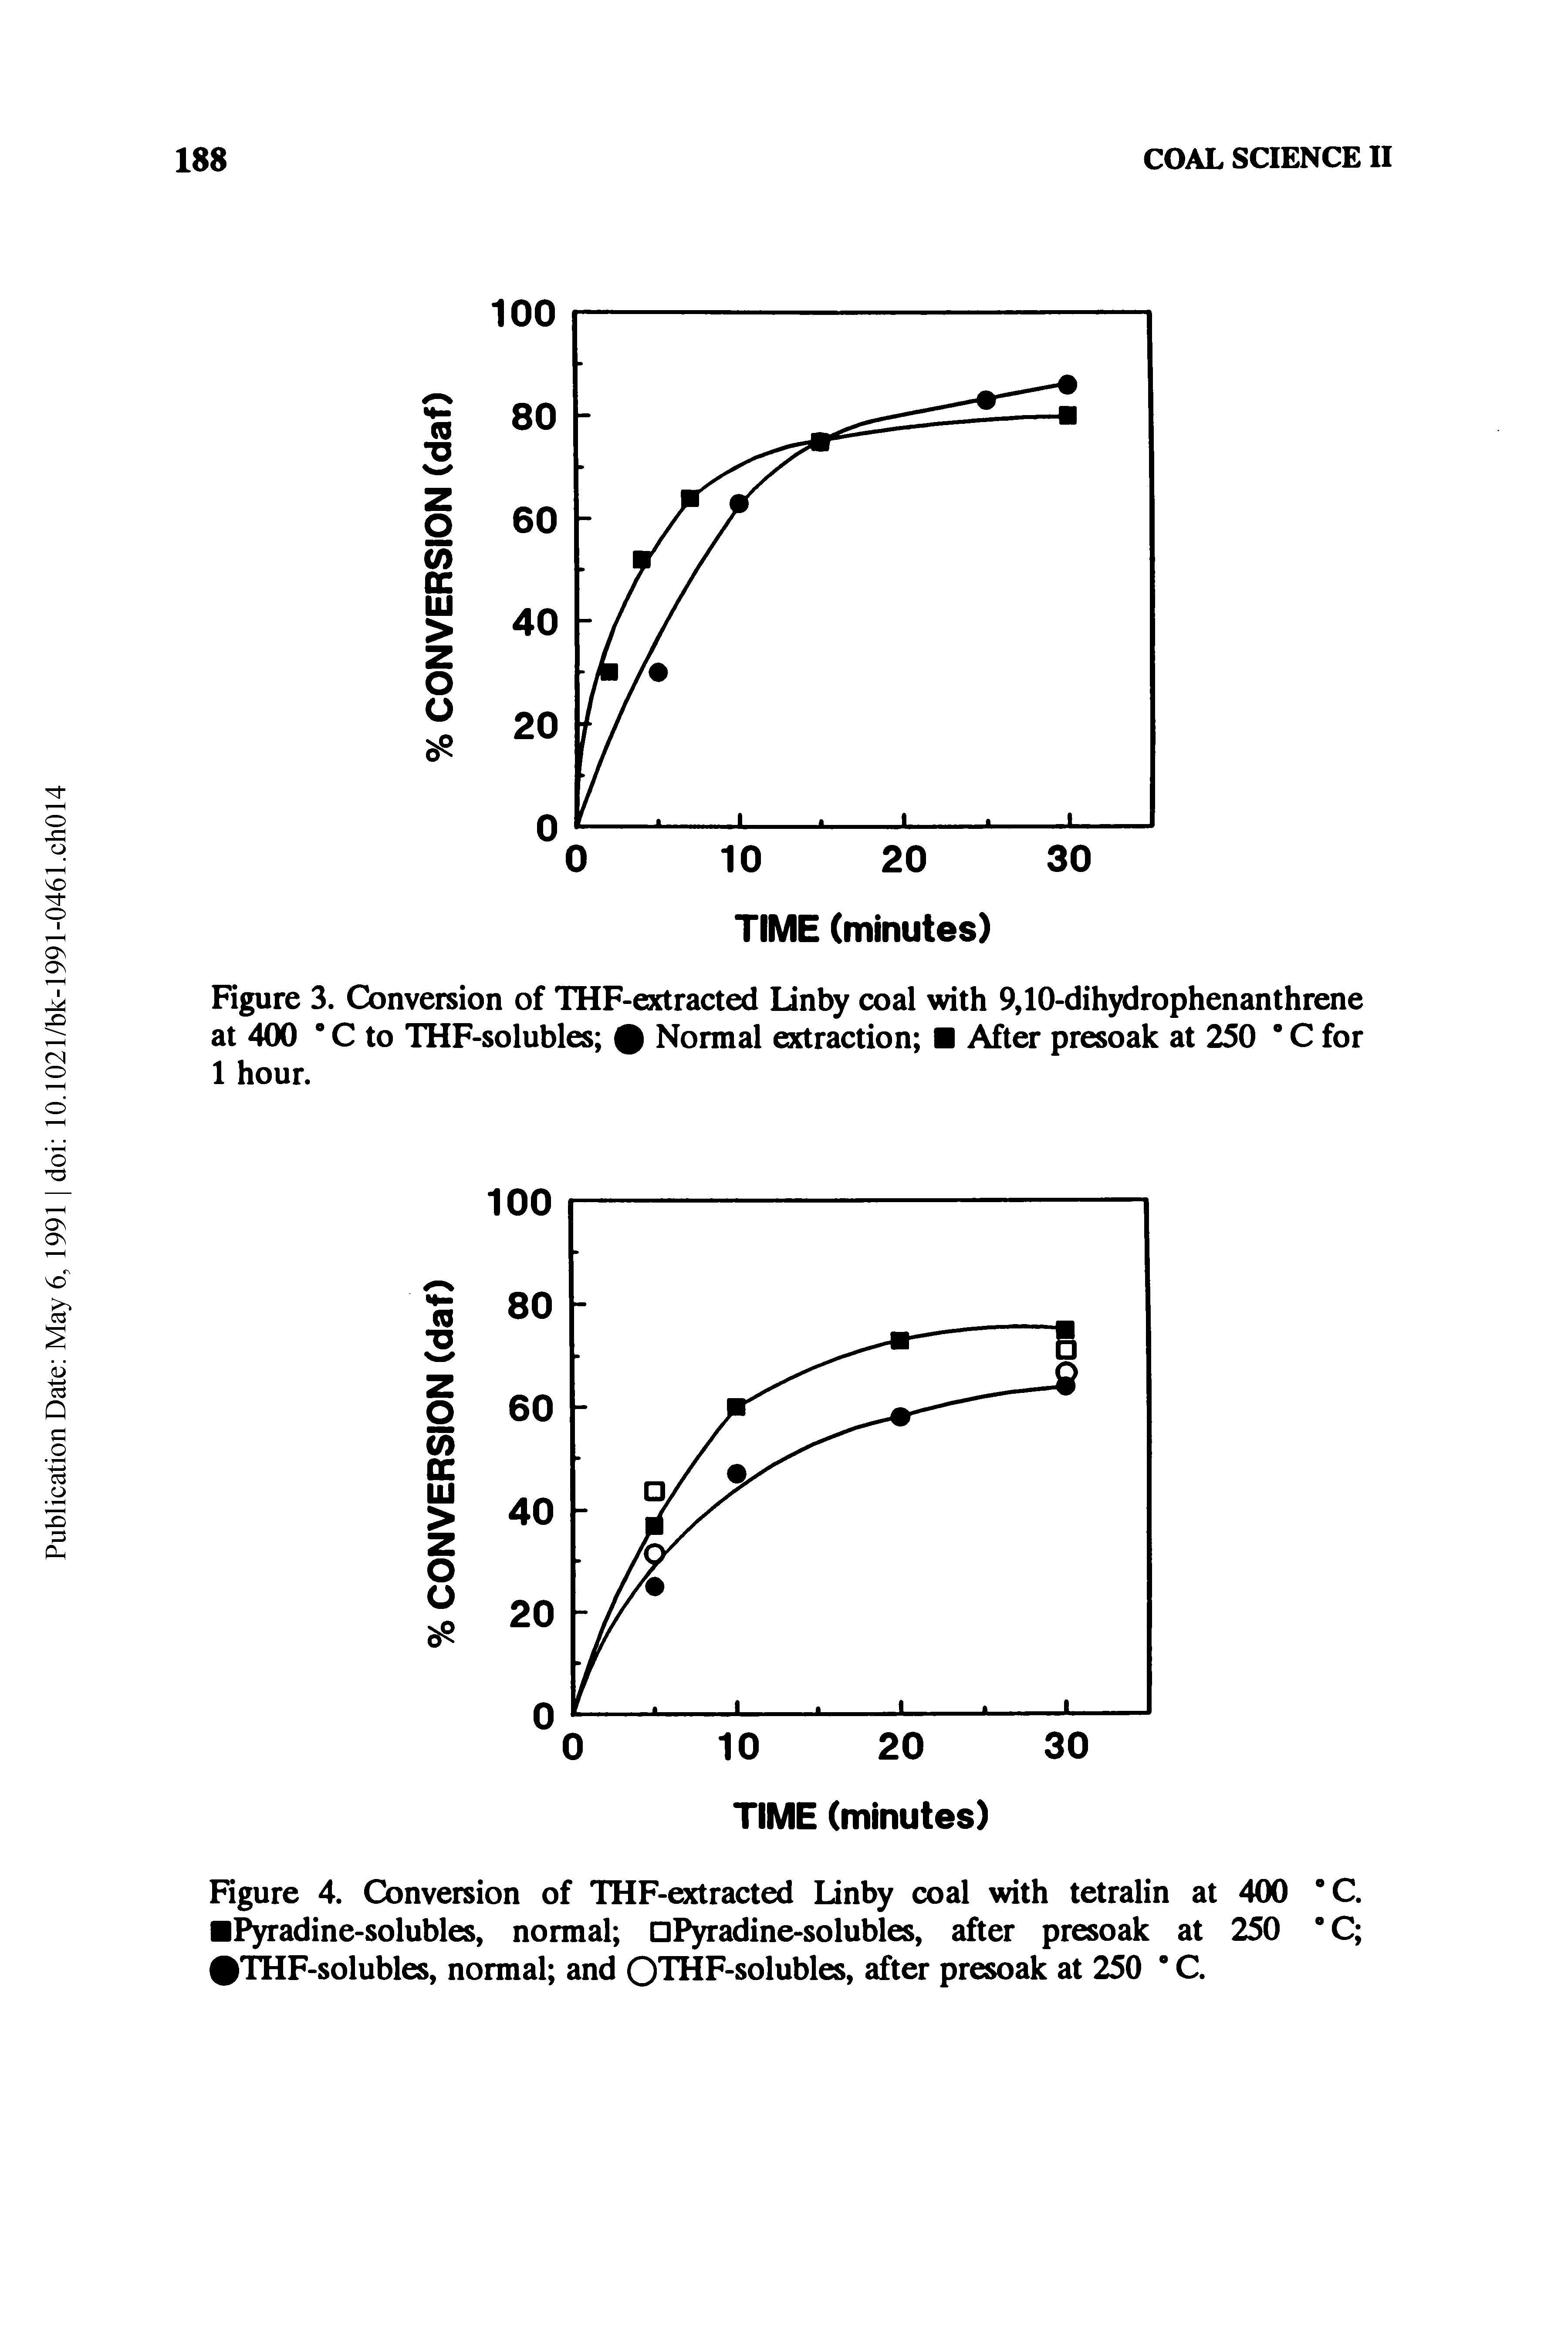 Figure 4. Conversion of THF-extracted Linby coal with tetralin at 400 "C. Pyradine-solubles, normal aPyradine-solubles, after presoak at 250 " C THF-solubles, normal and QTHF-solubles, after presoak at 250 " C.